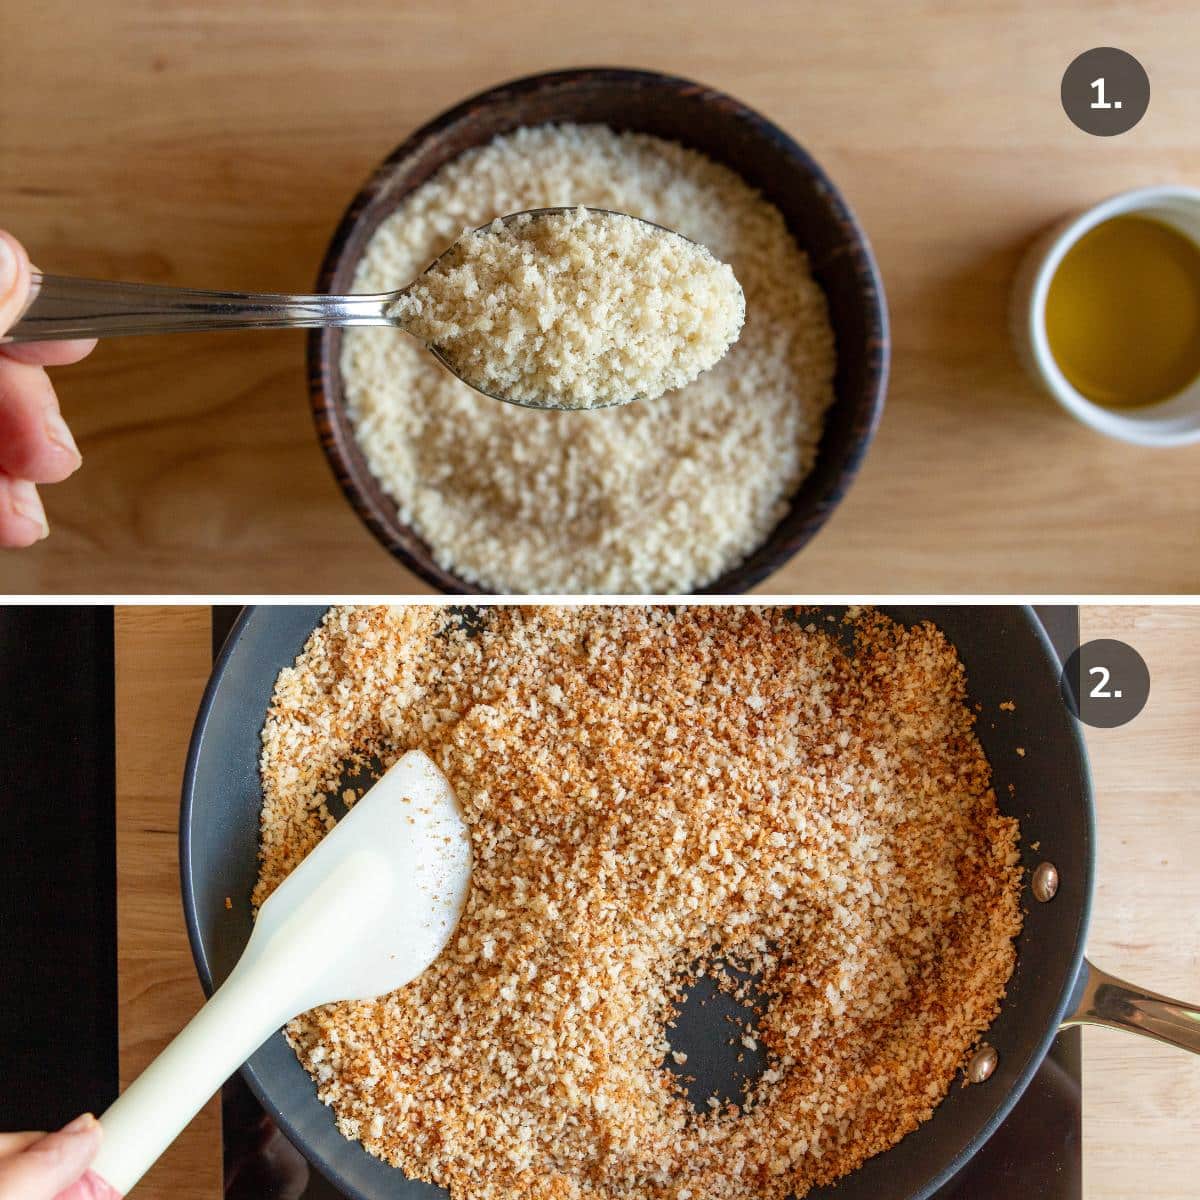 Showing panko breadcrumbs before and after toasting. 